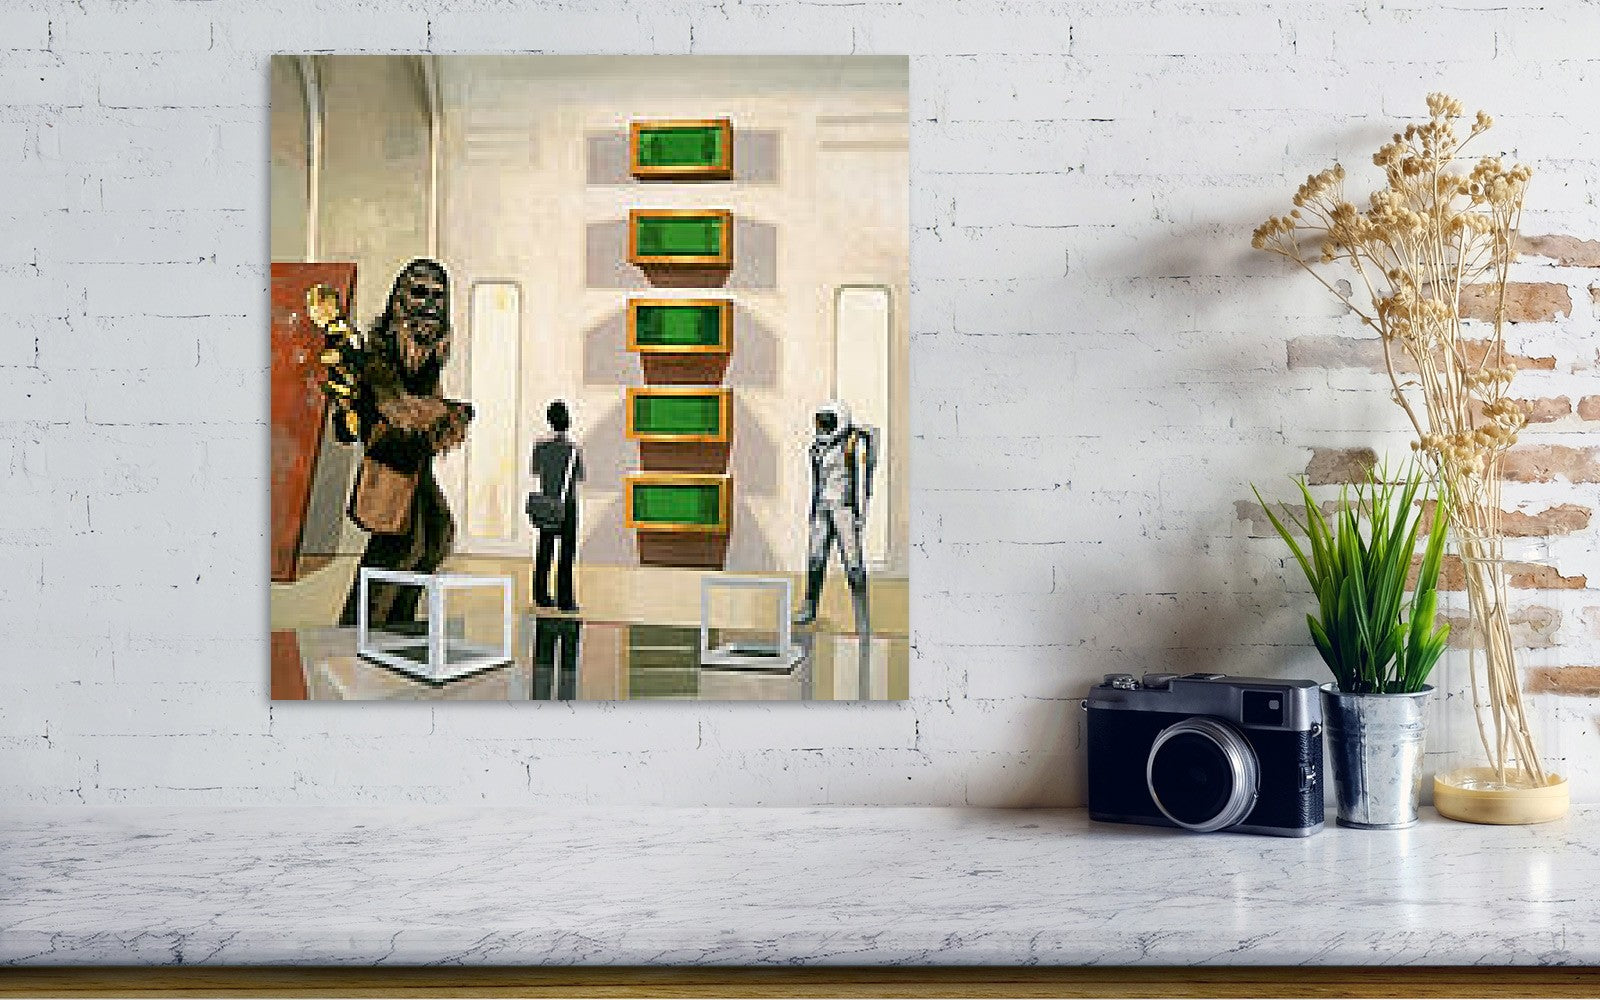 Chewbacca In Cloud City With Art Art Print Canvas And Poster, Warm Home Decor Wall Art Visual Art 1617268378962.jpg